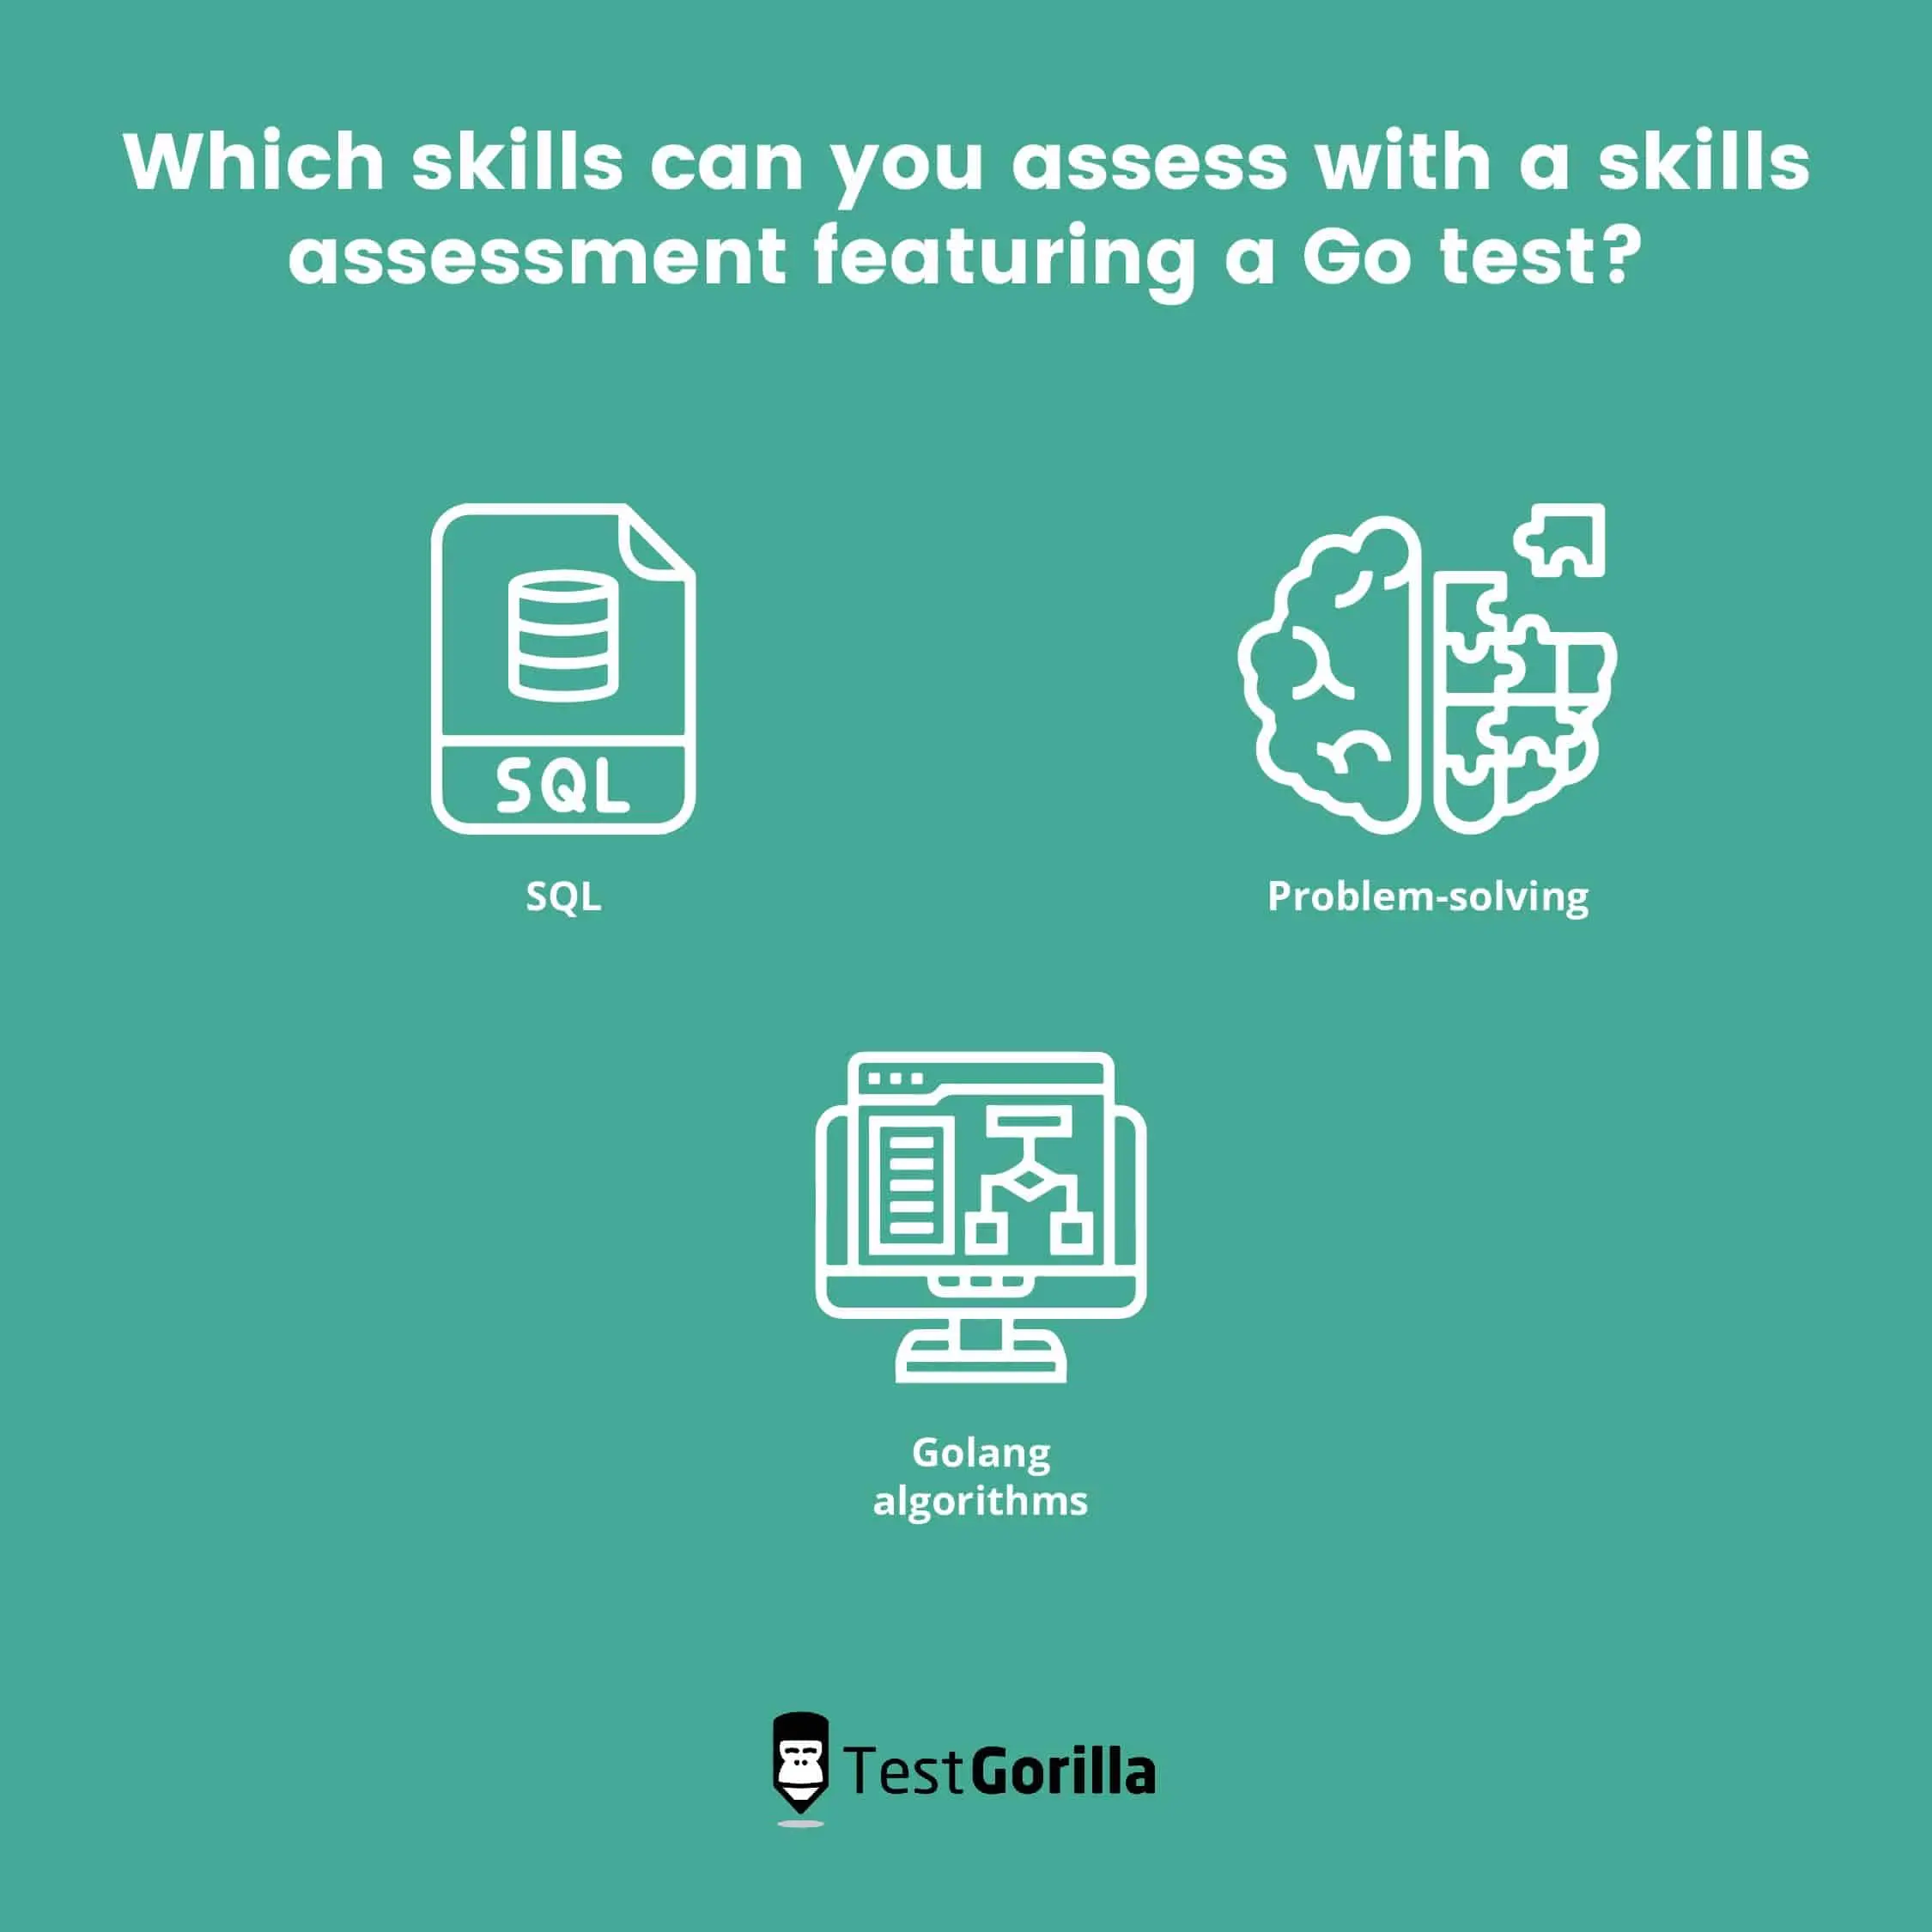 which skills can you assess with a skills assessment featuring a Go test